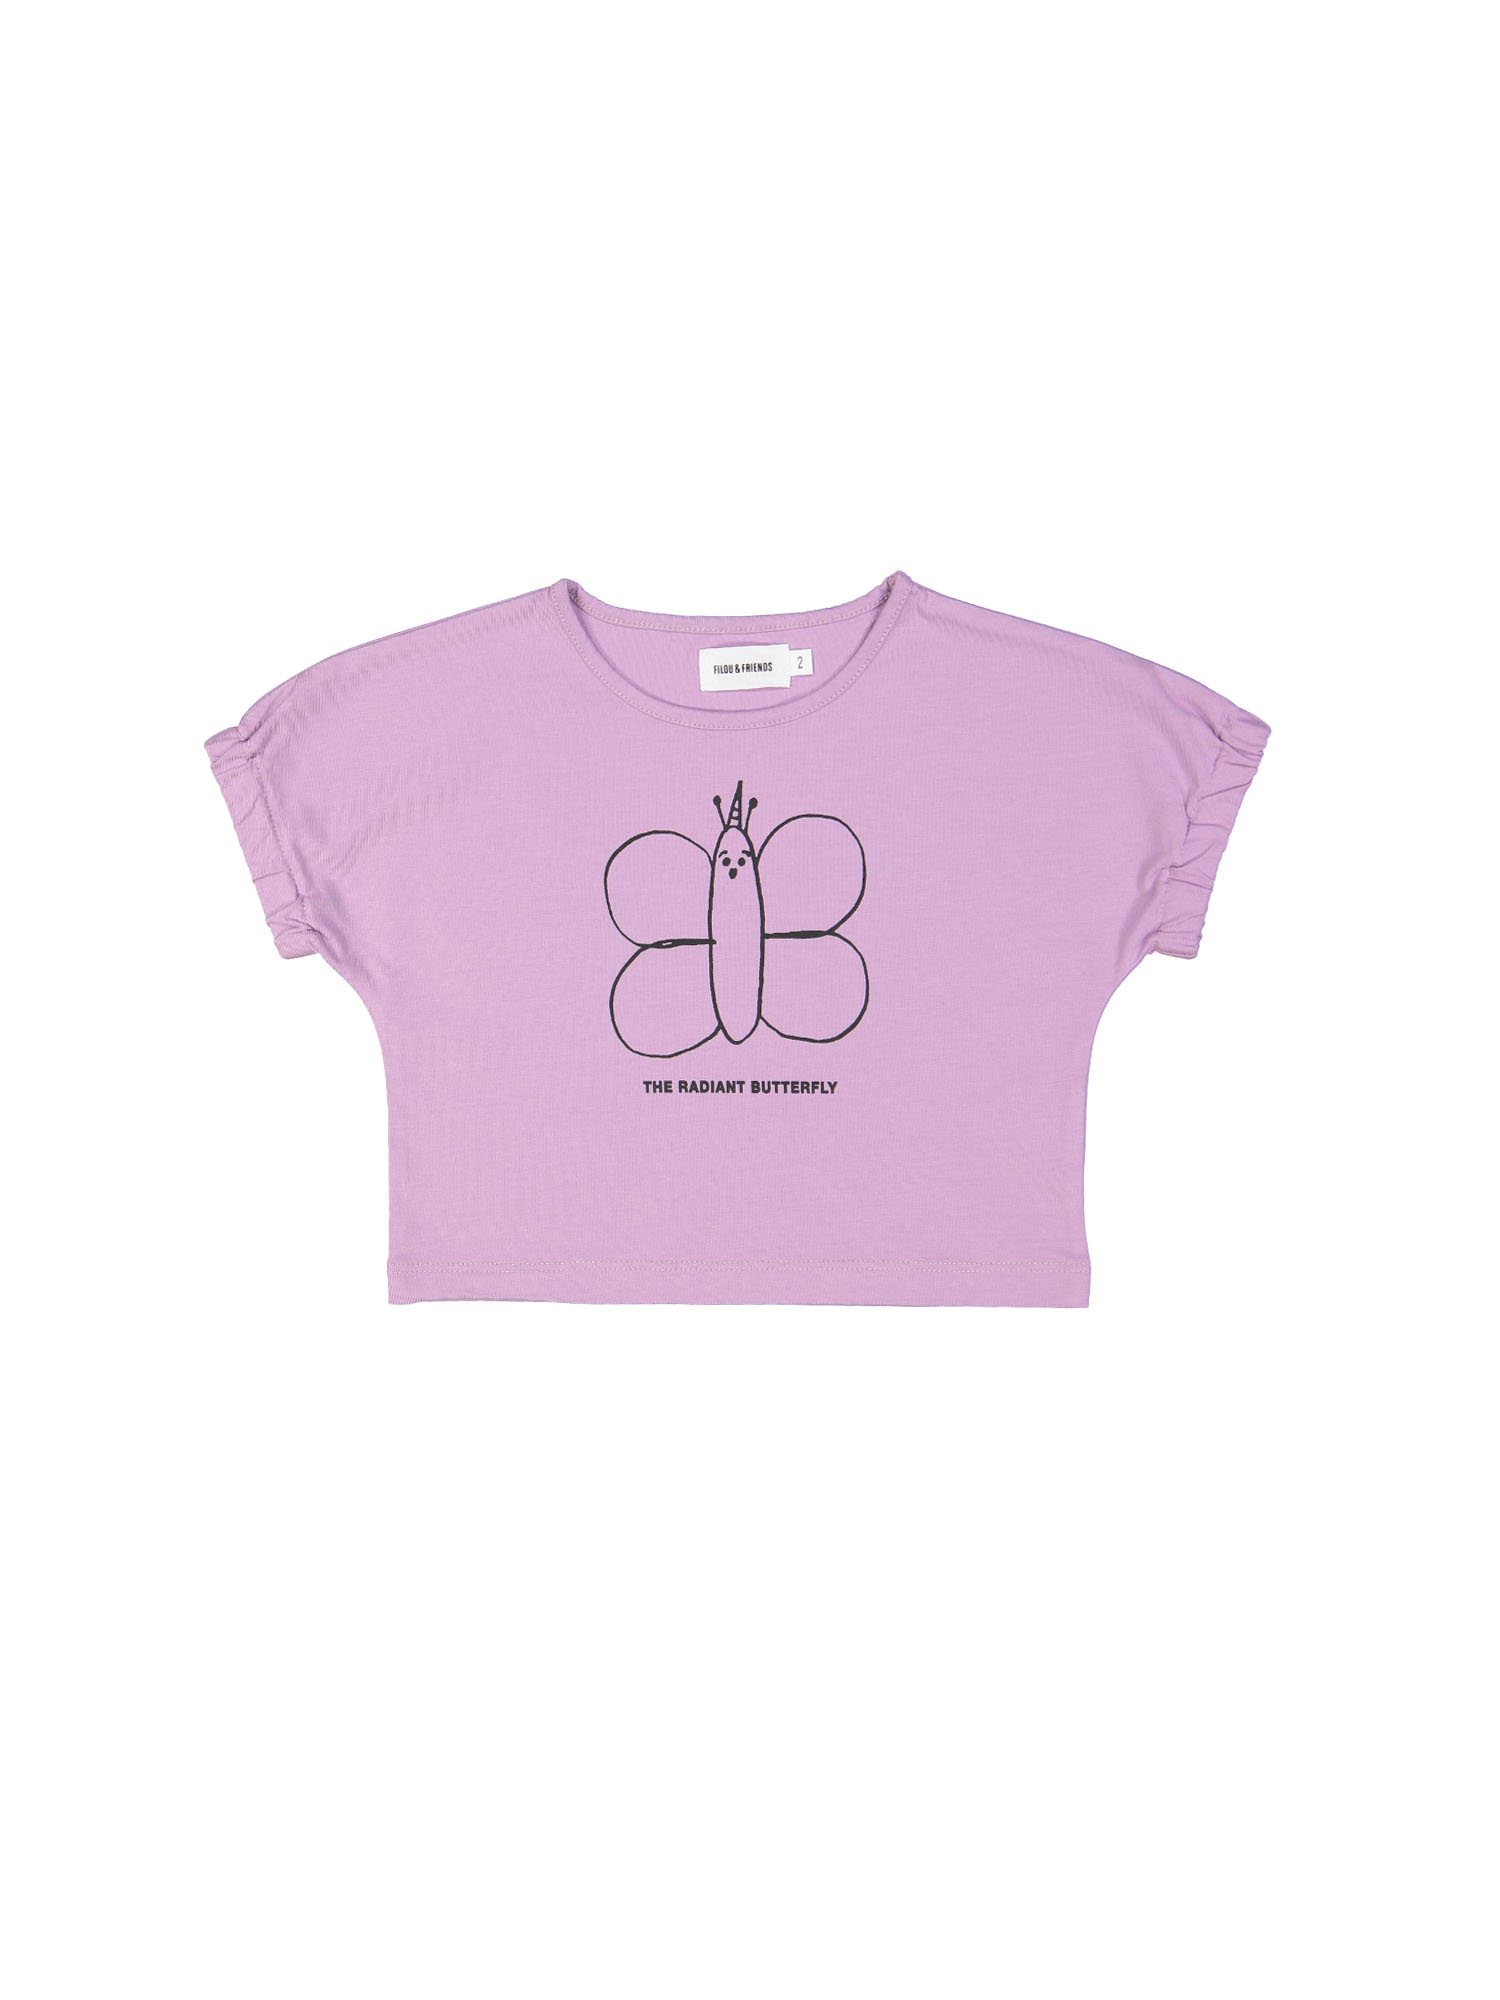 t-shirt boxy radiant butterfly paars 02j